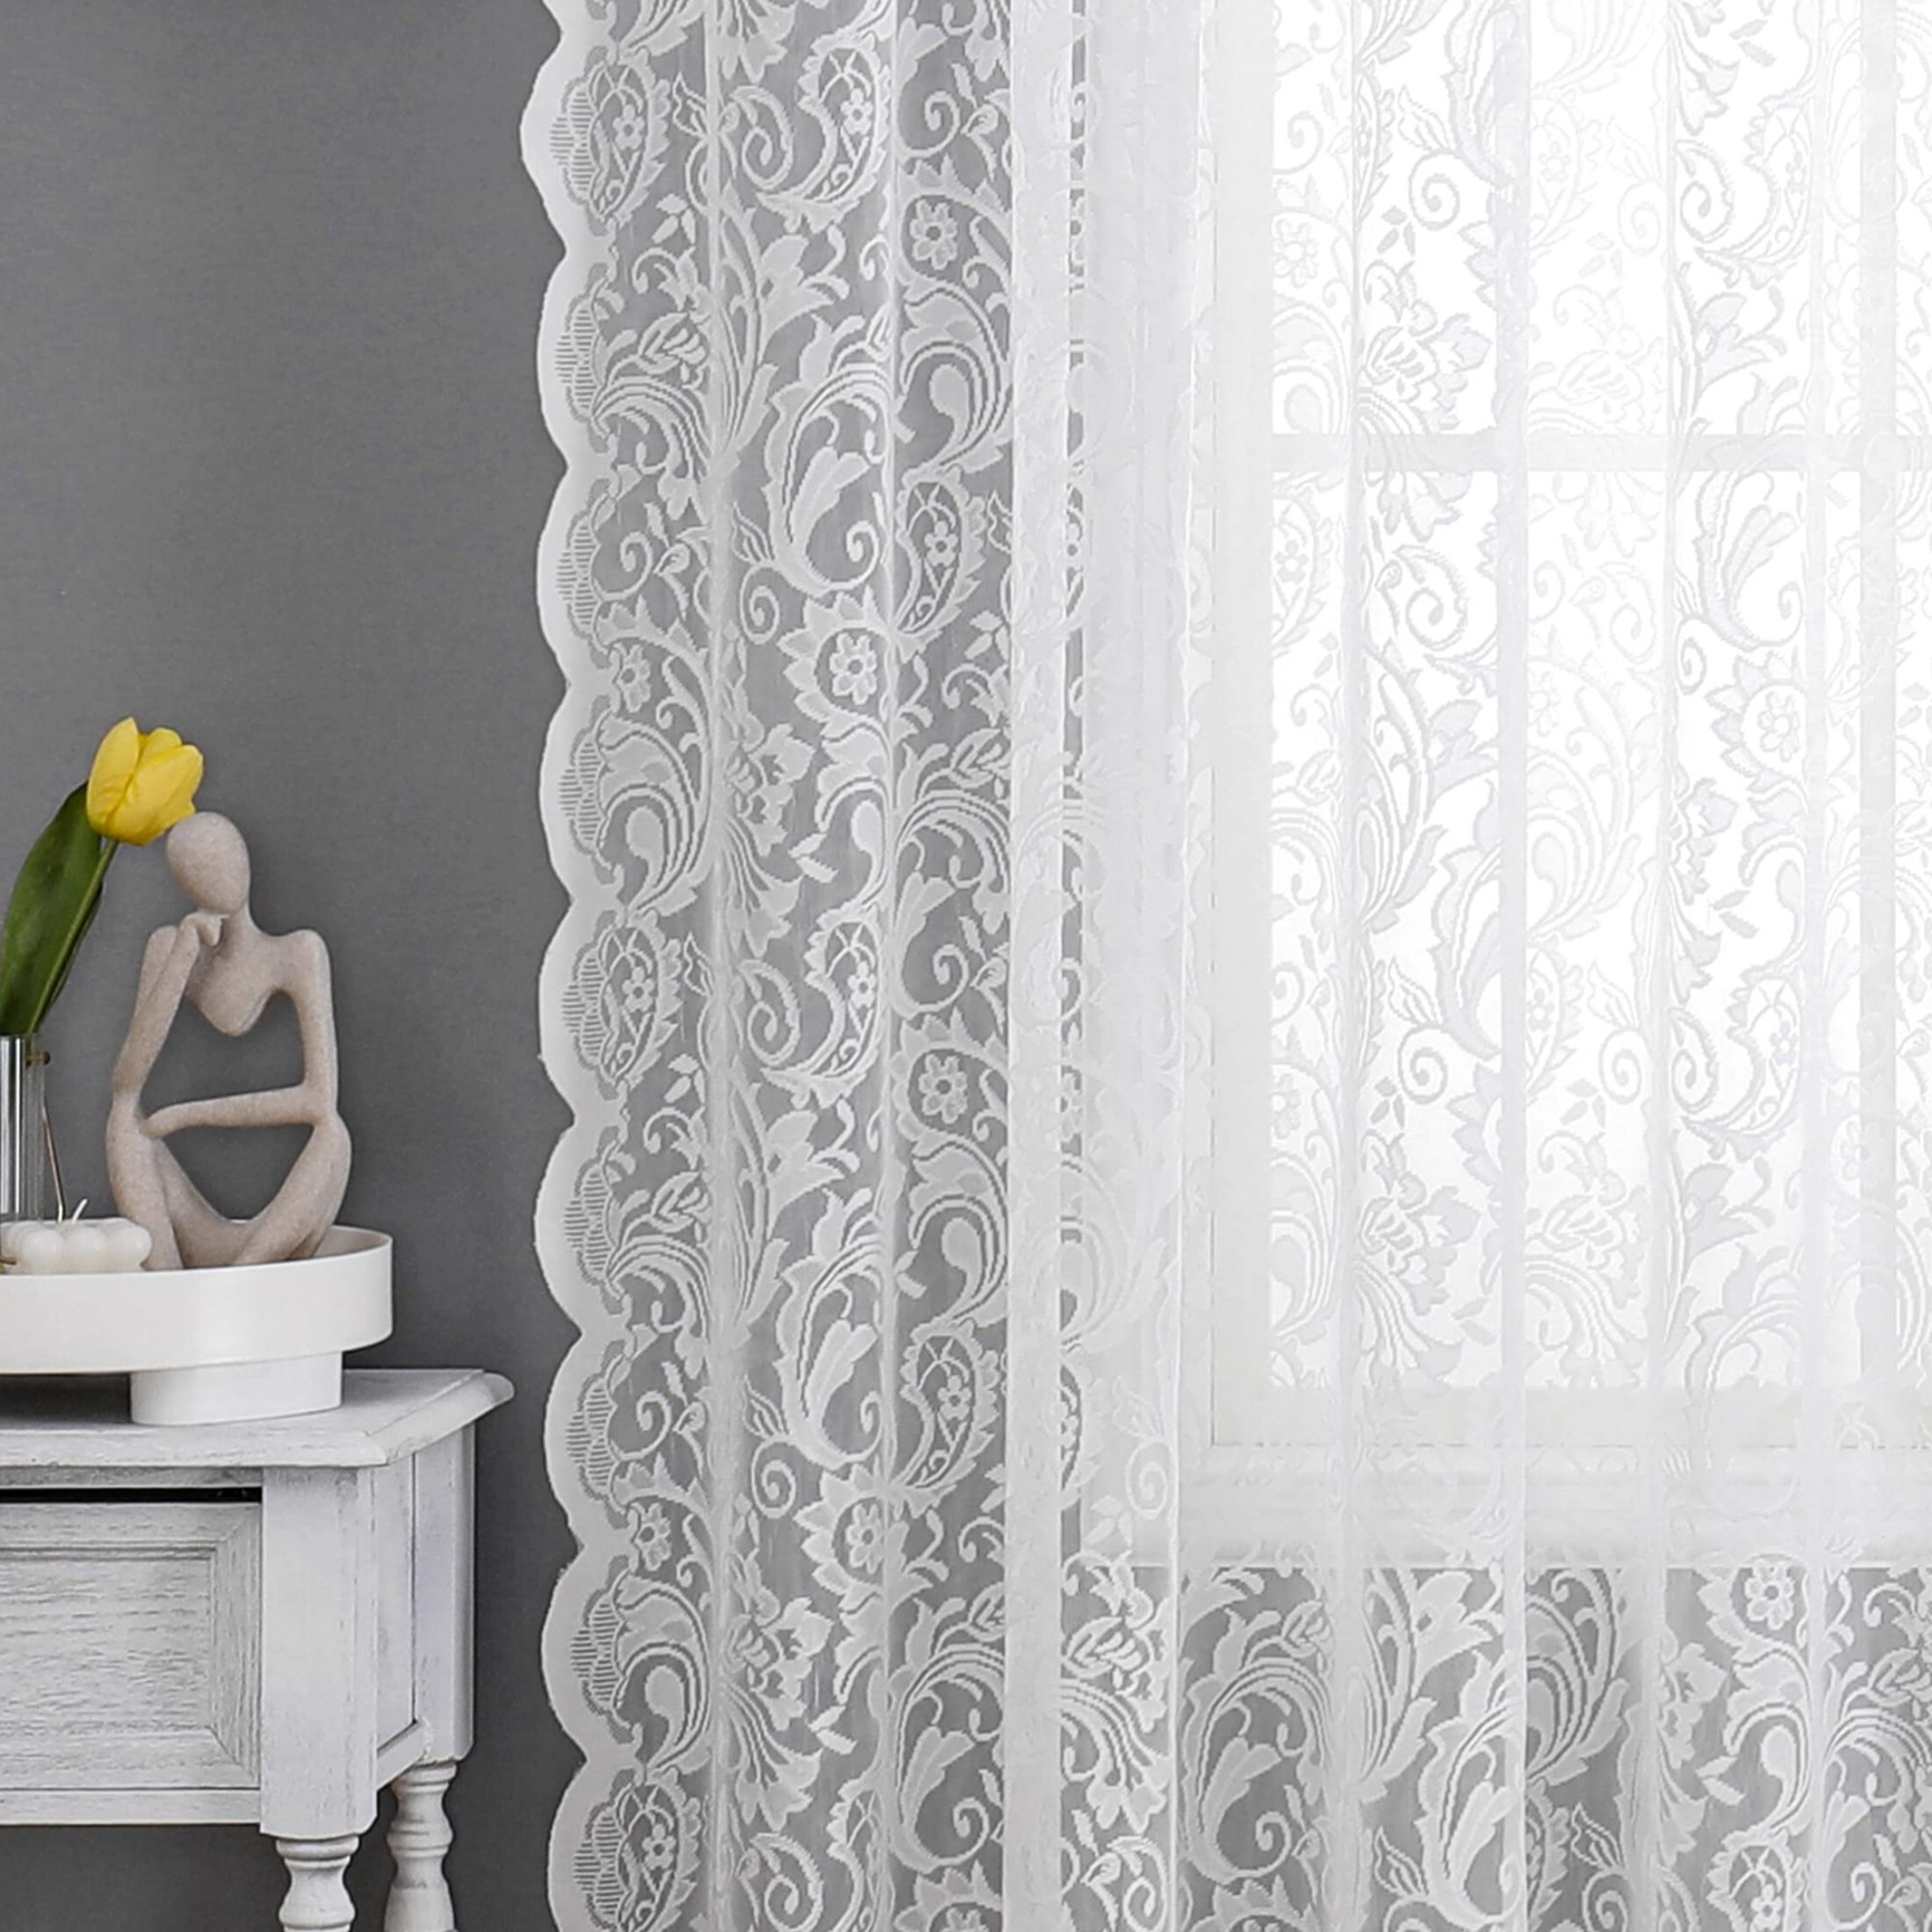 Basic Home Rod Pocket Sheer Voile Window Curtains - White, 45 in. Long ...